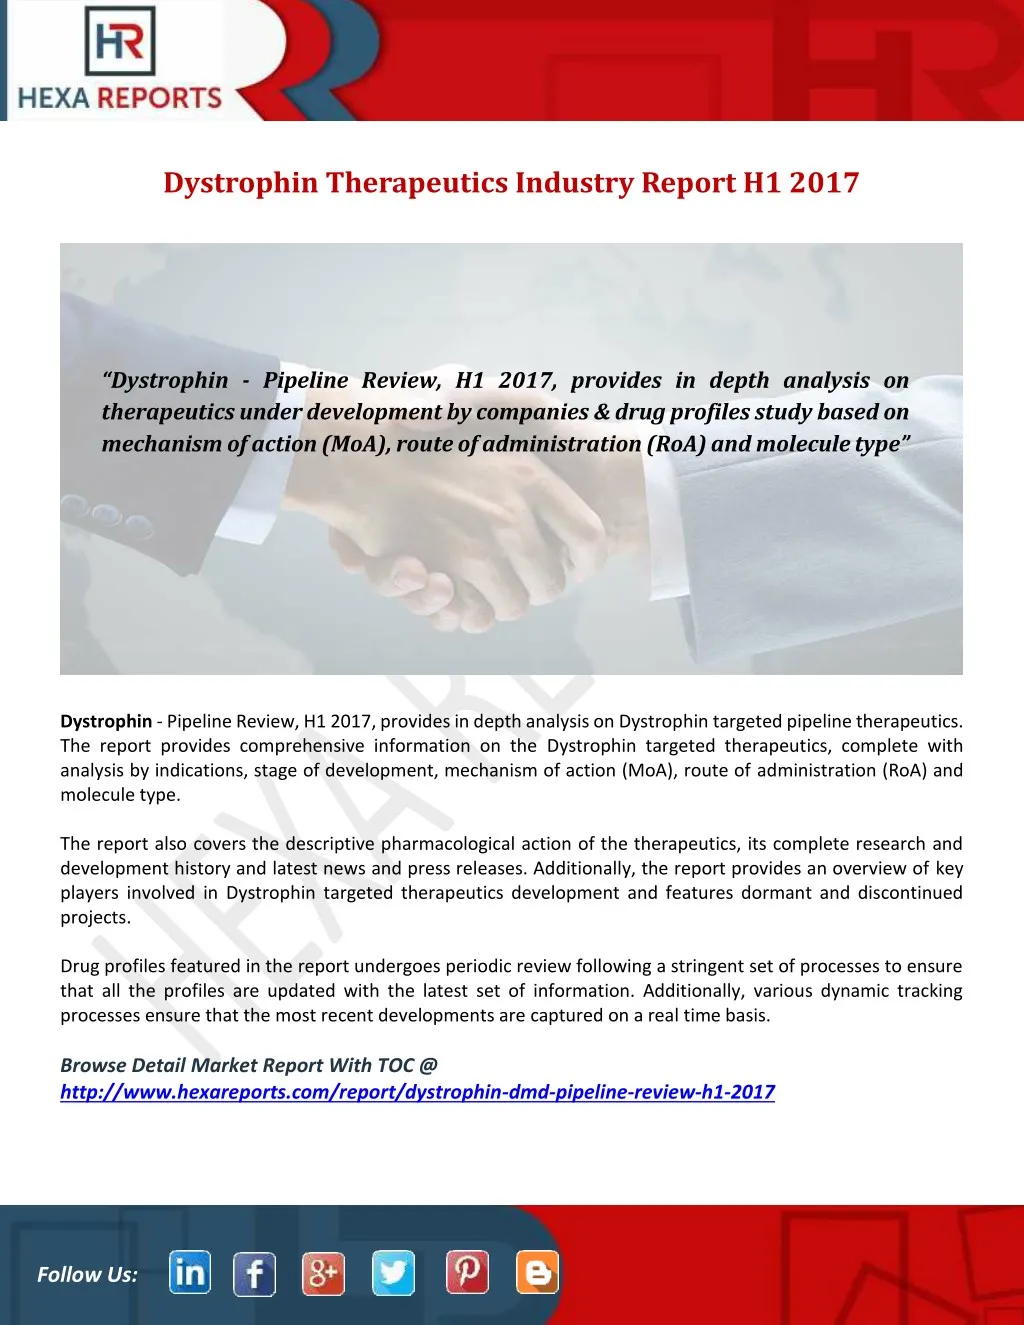 dystrophin therapeutics industry report h1 2017